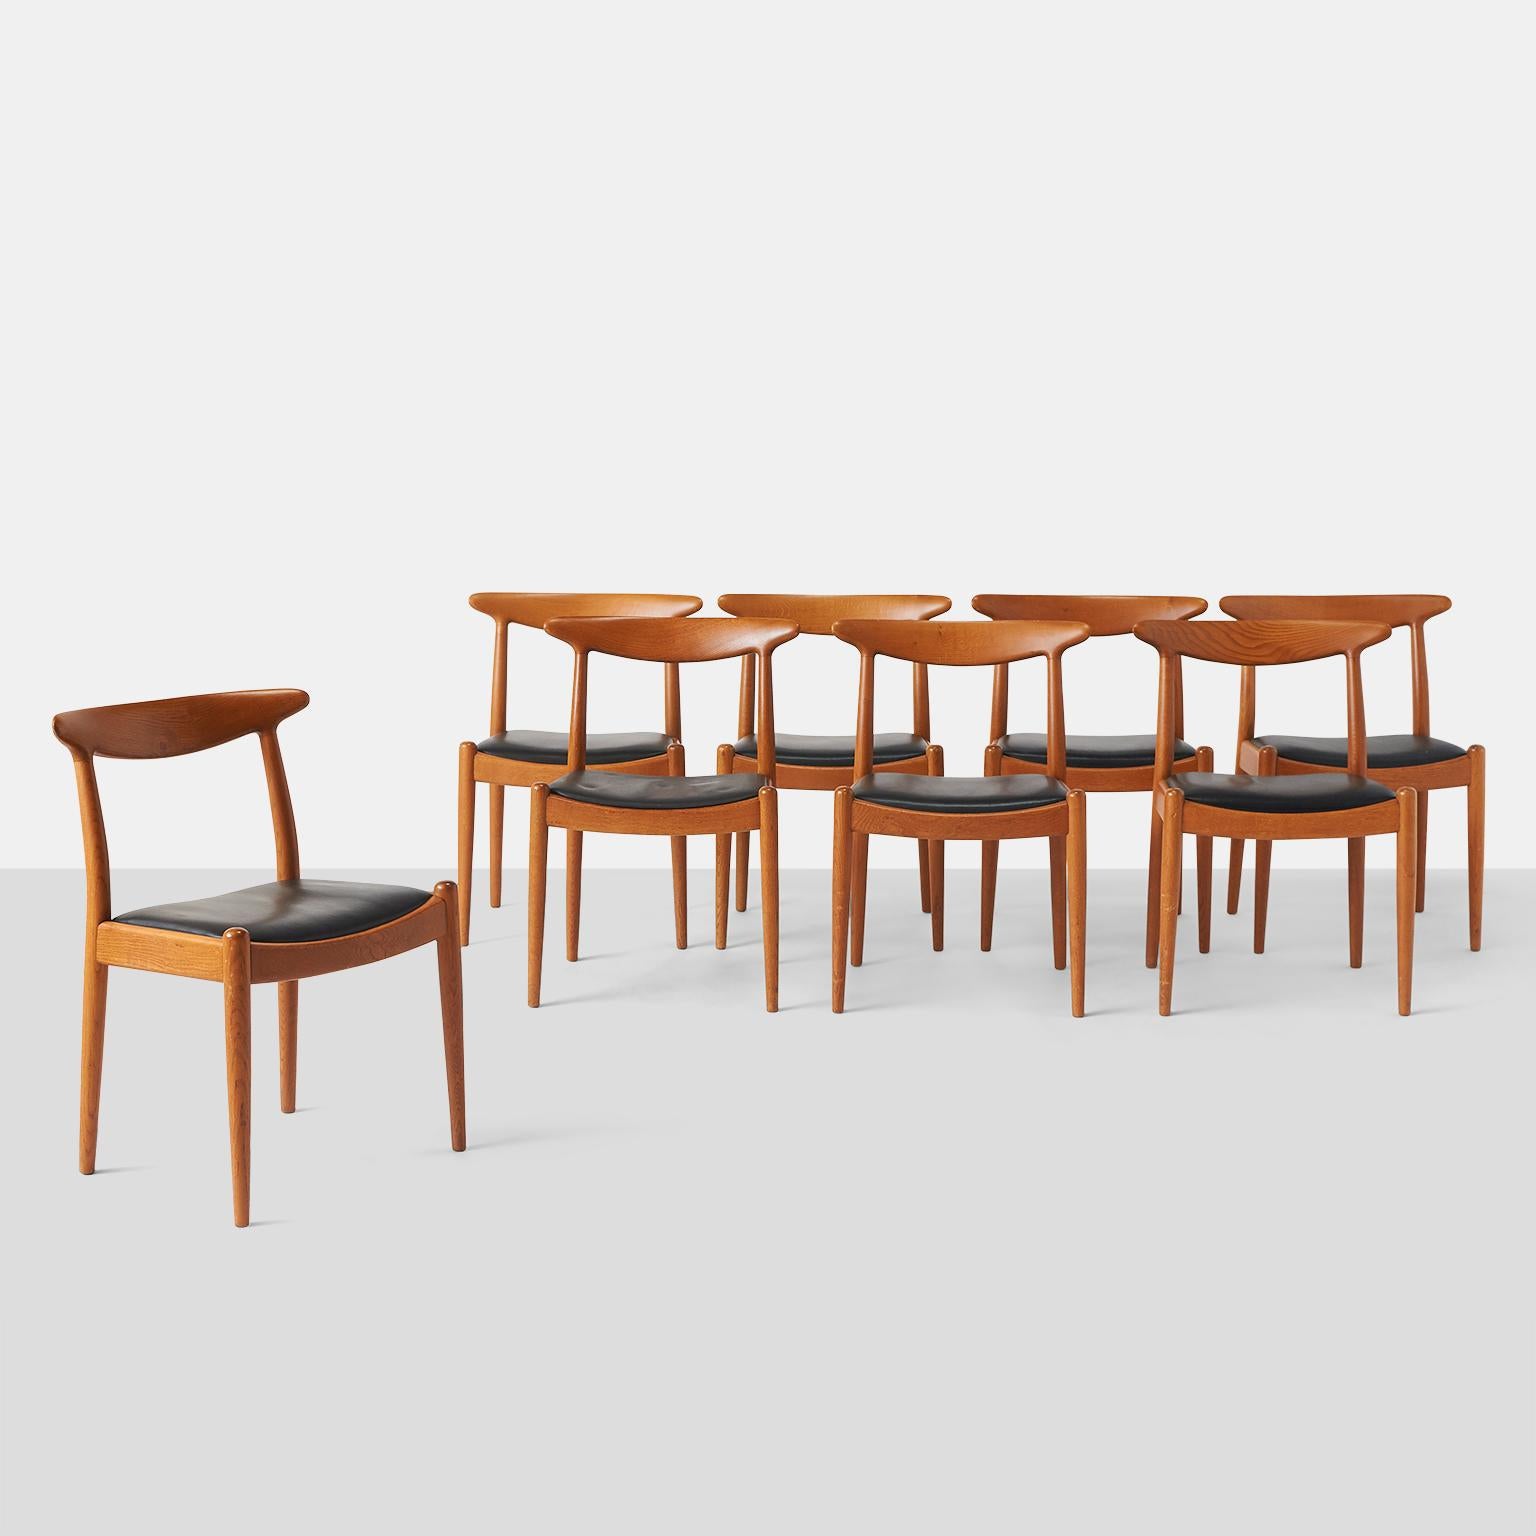 A set of eight W2 oak dining chairs featuring an inset black upholstered seat and tapered legs.

Stamped C M Madsens, made in Denmark, Hans J Wegner.